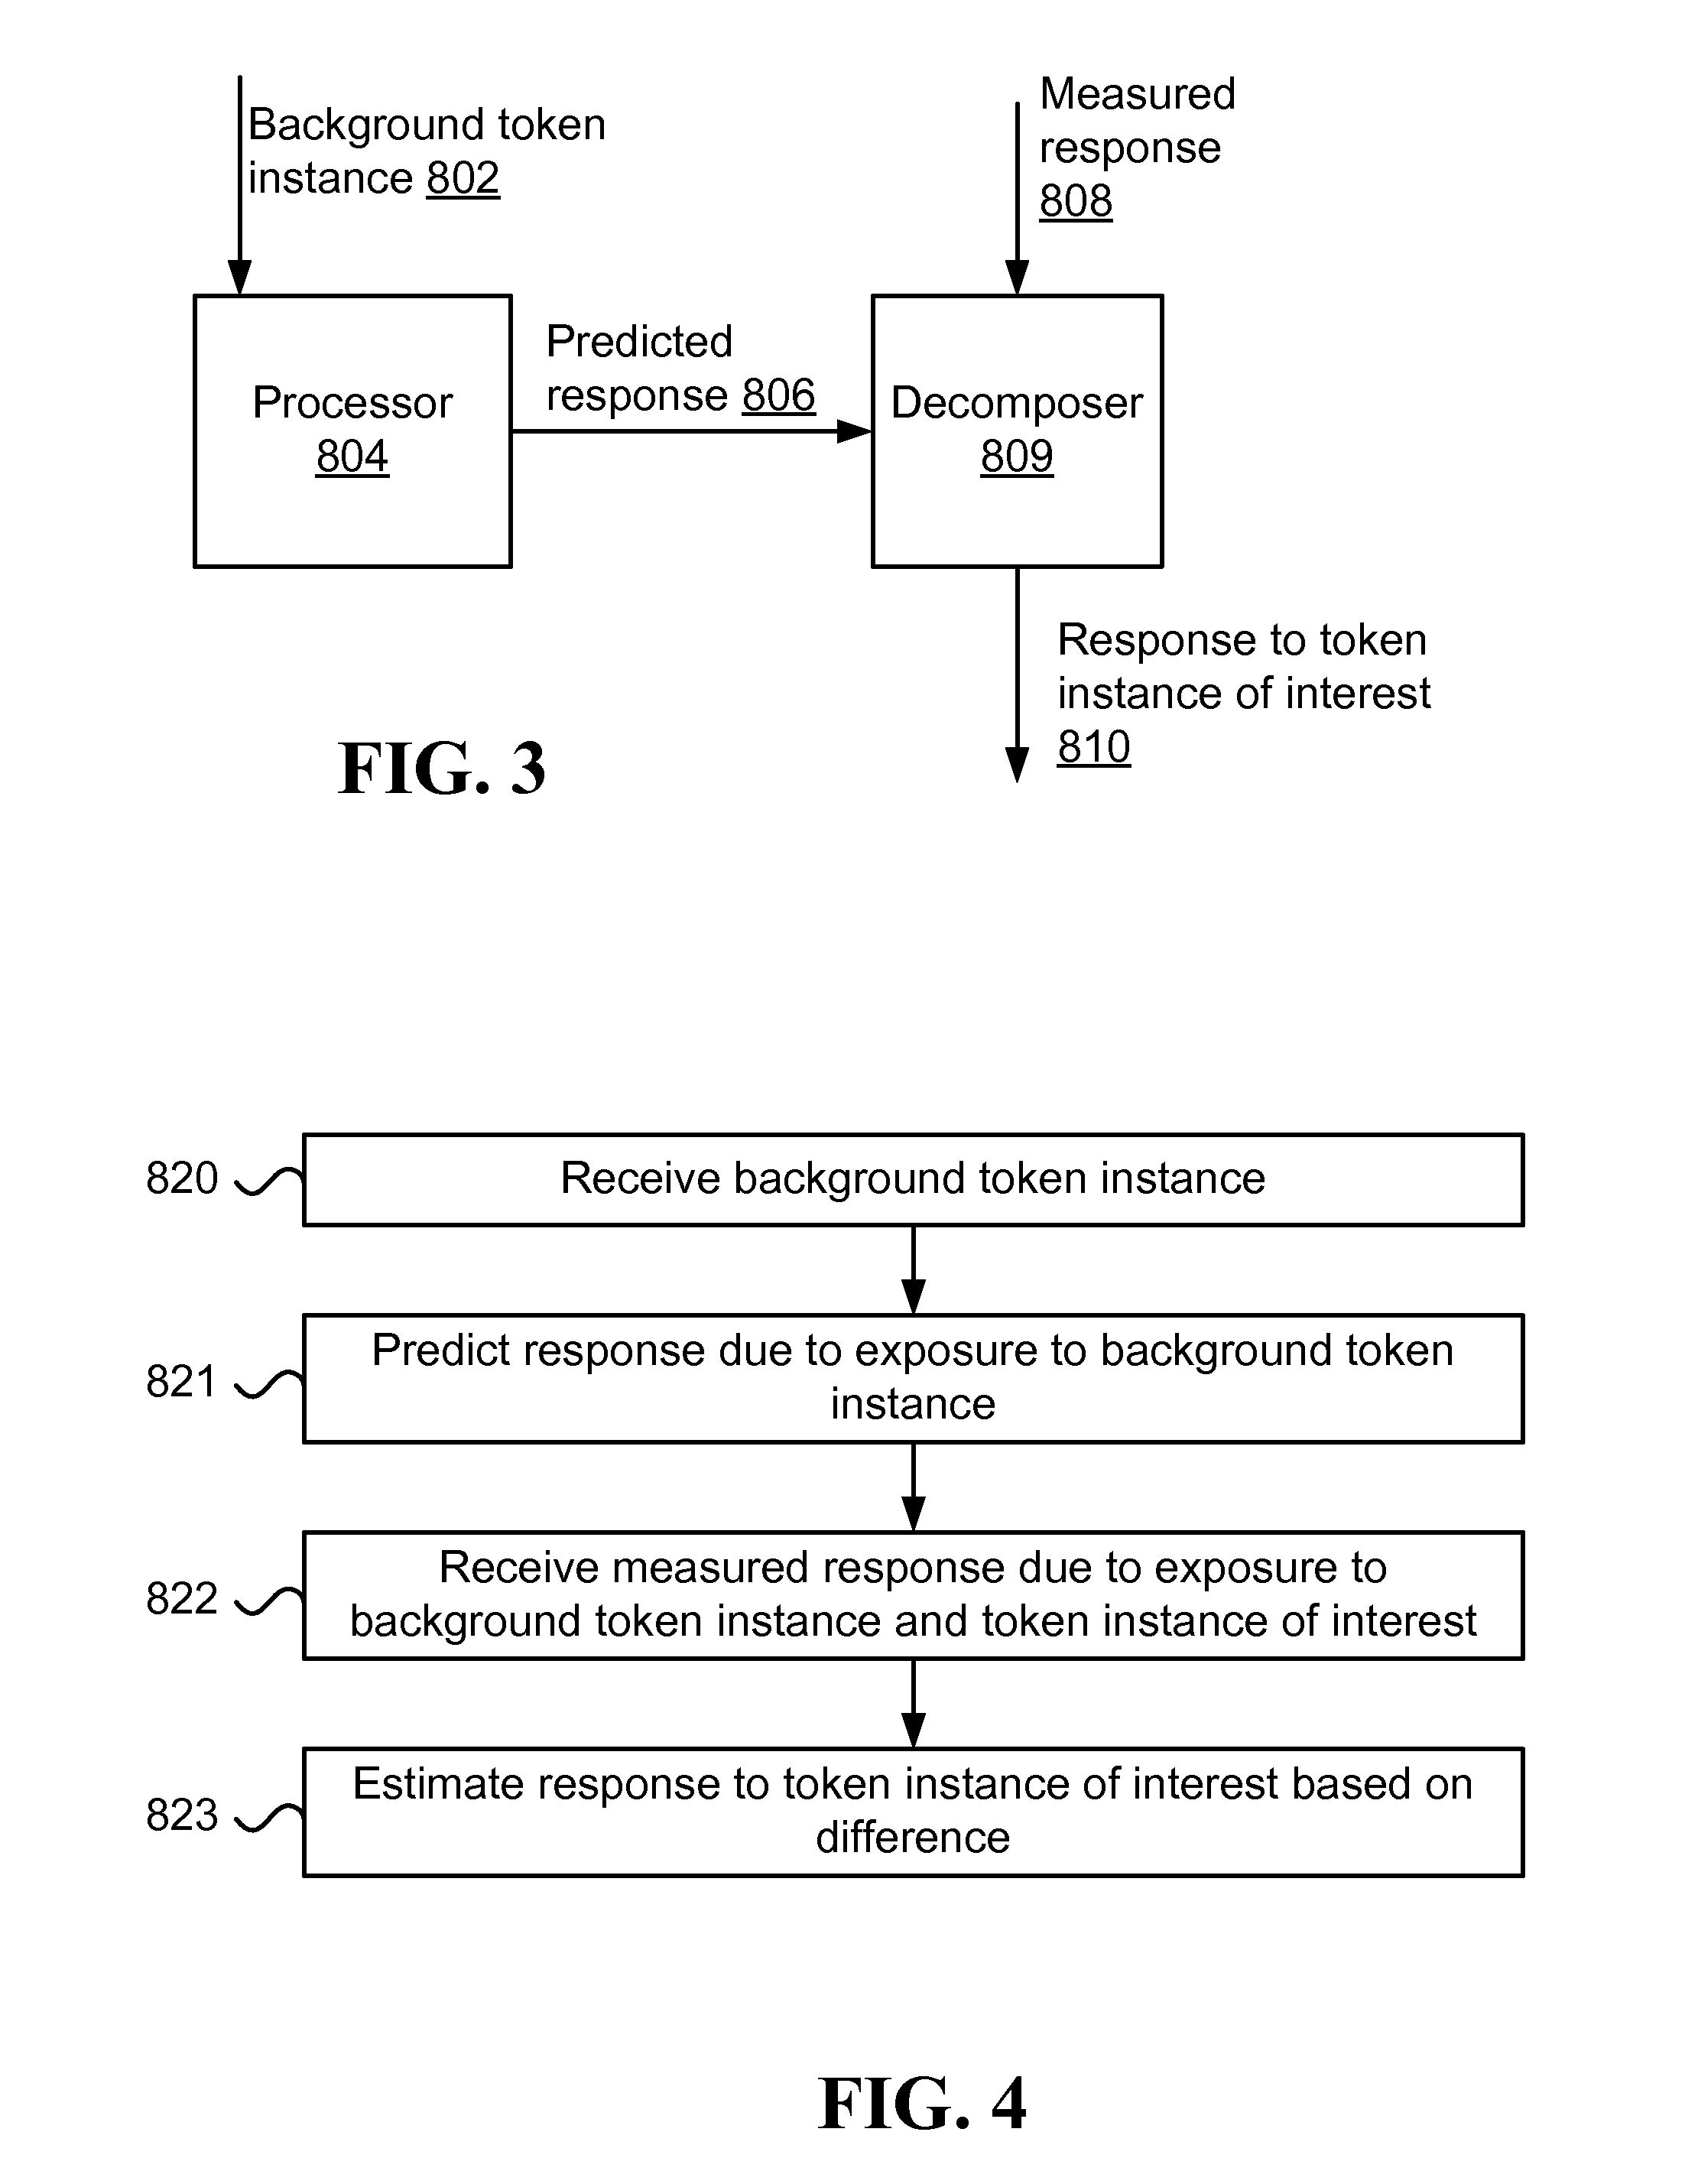 Method and system for estimating response to token instance of interest